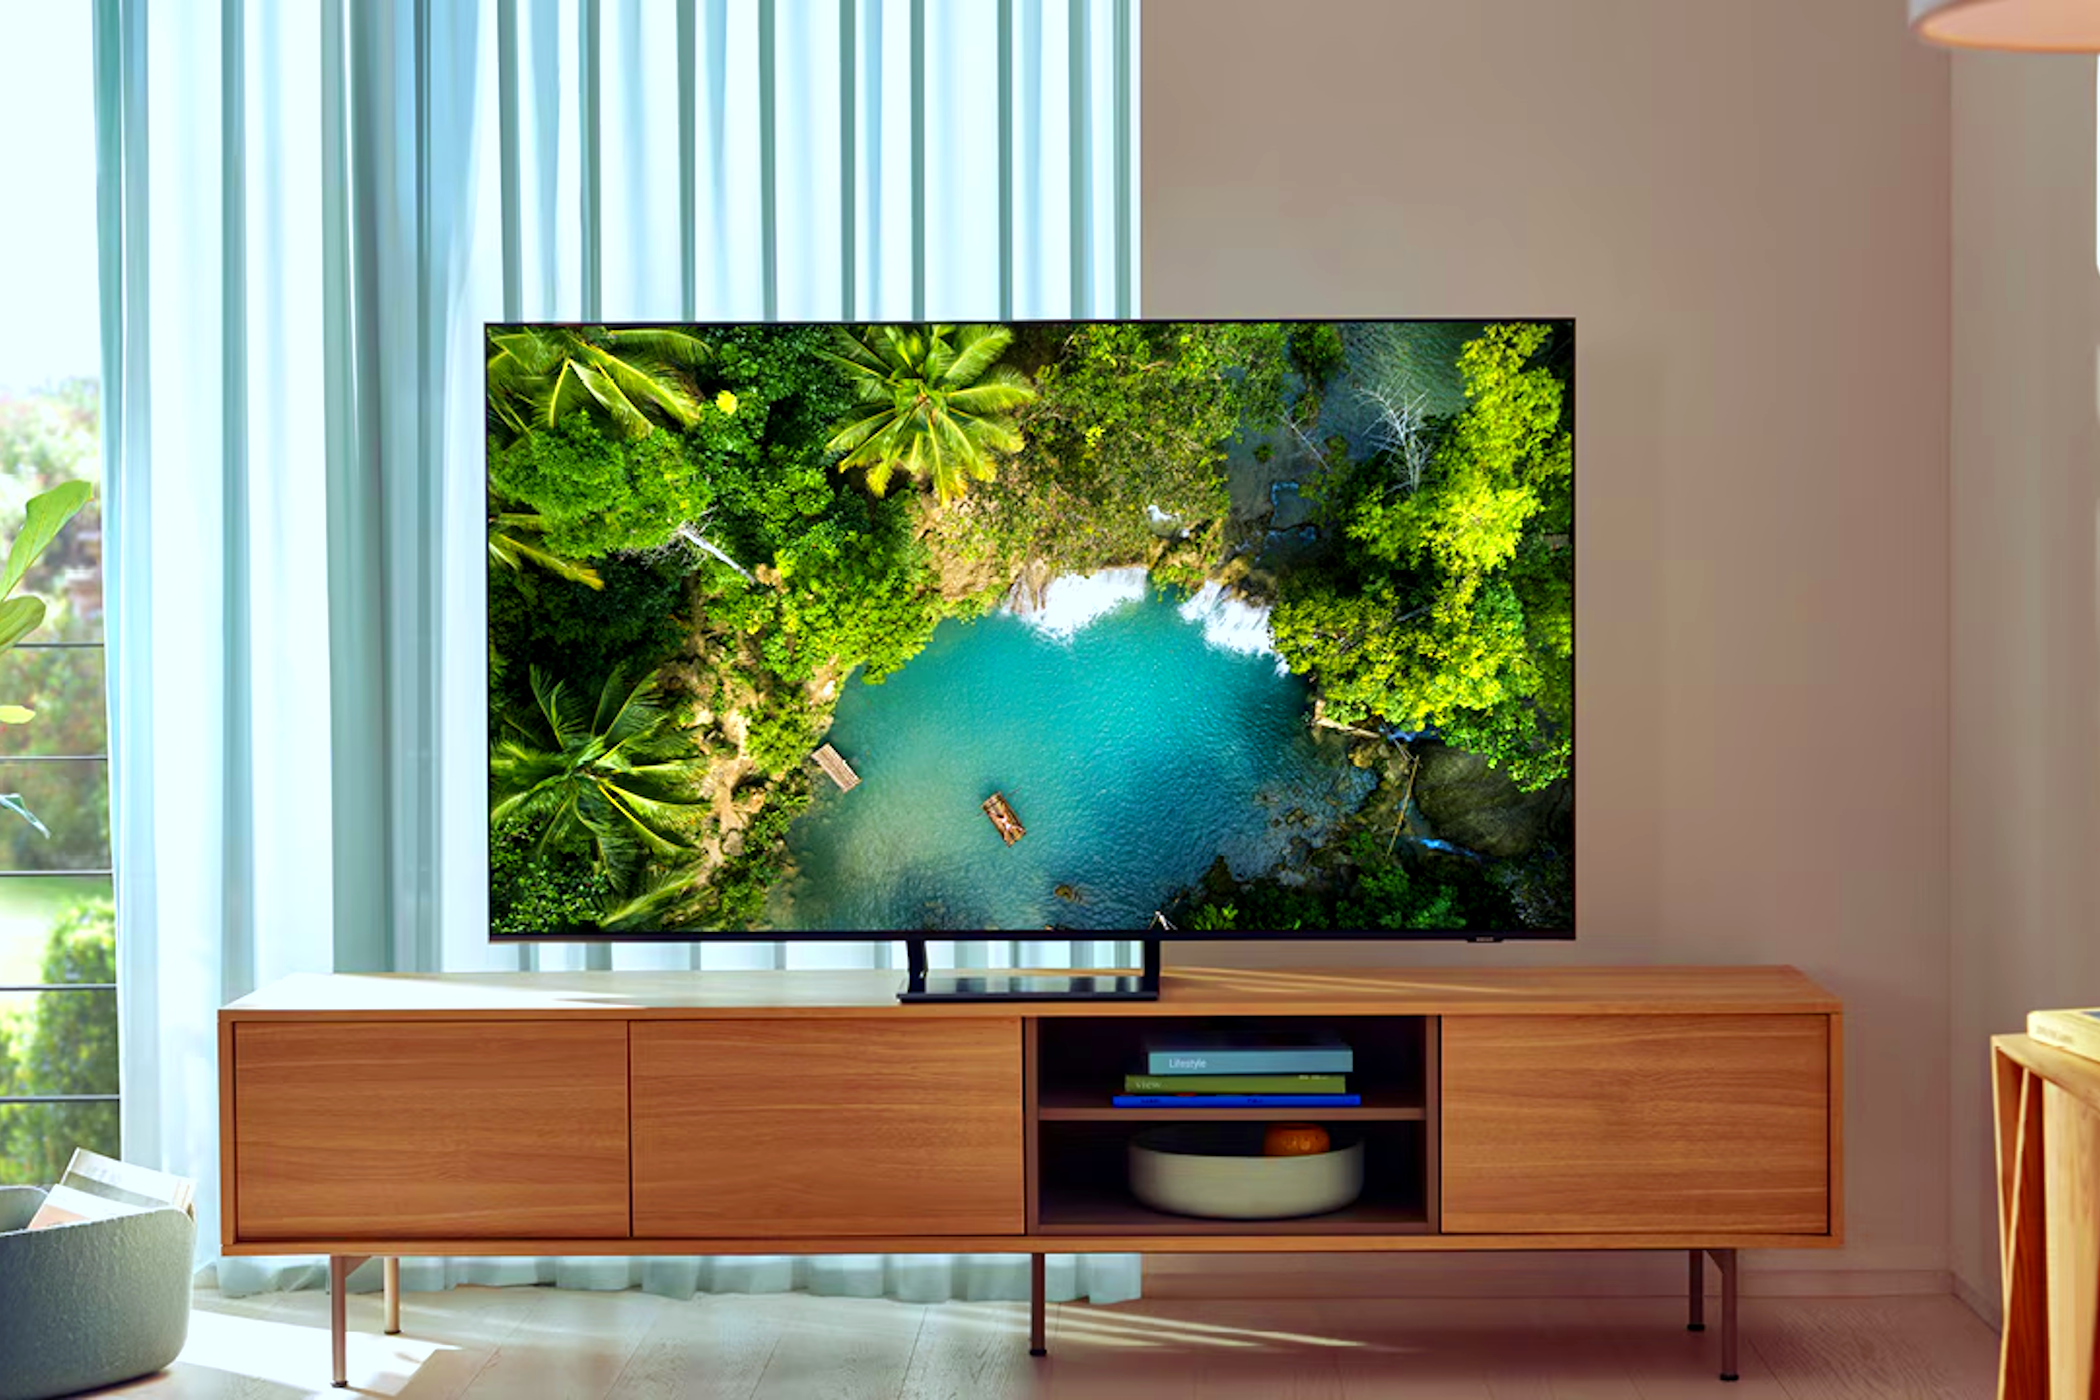 The 4 Reasons I Always Buy a QLED TV (and You Should Too)